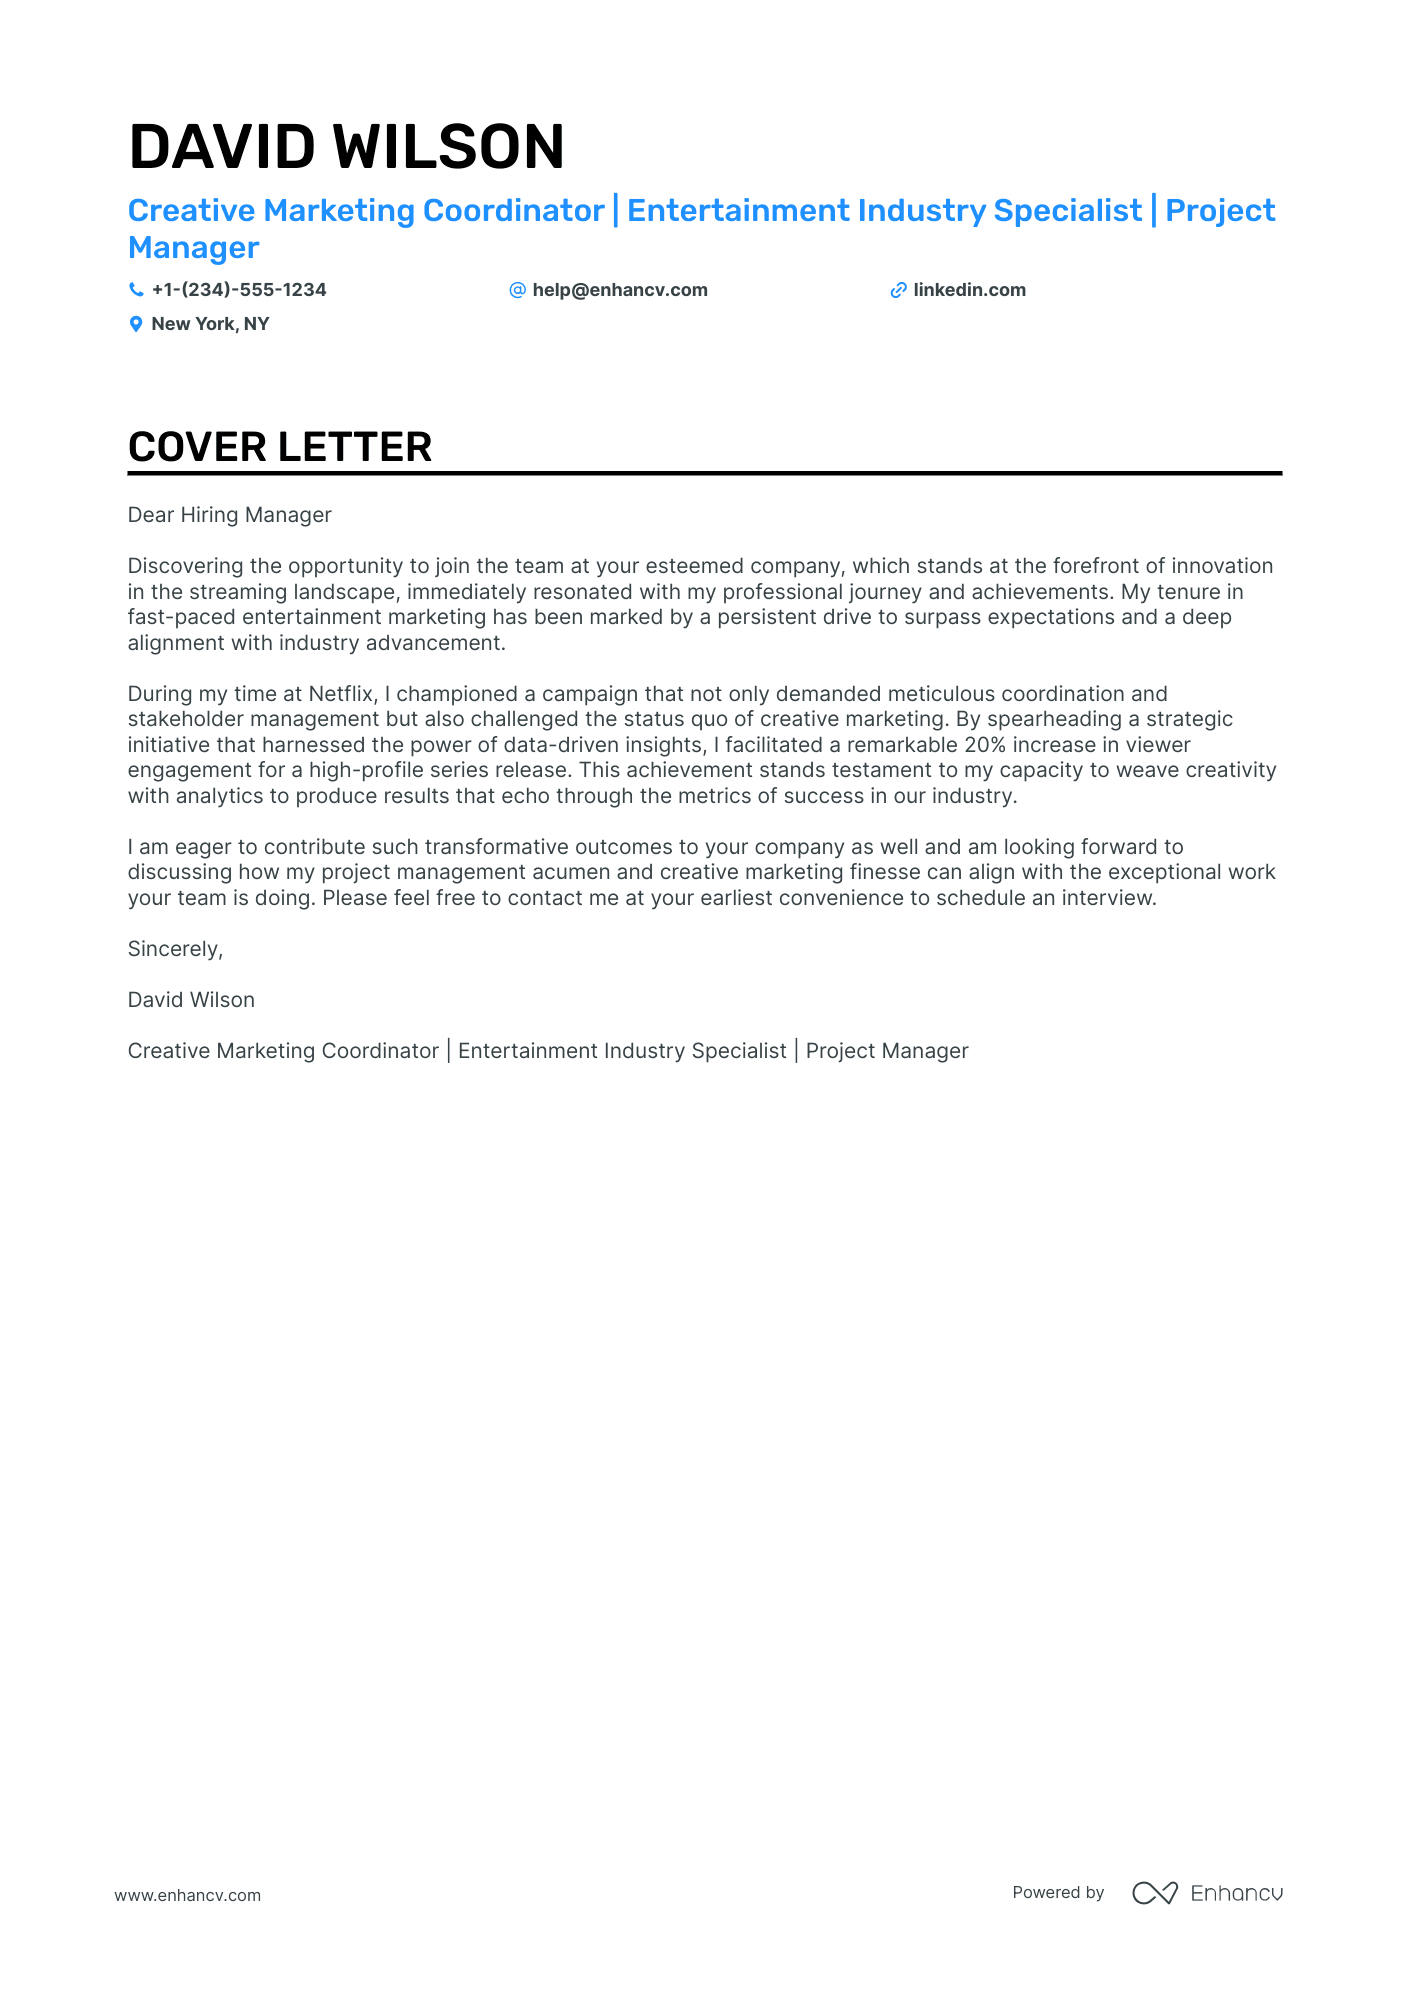 Creative Marketing cover letter